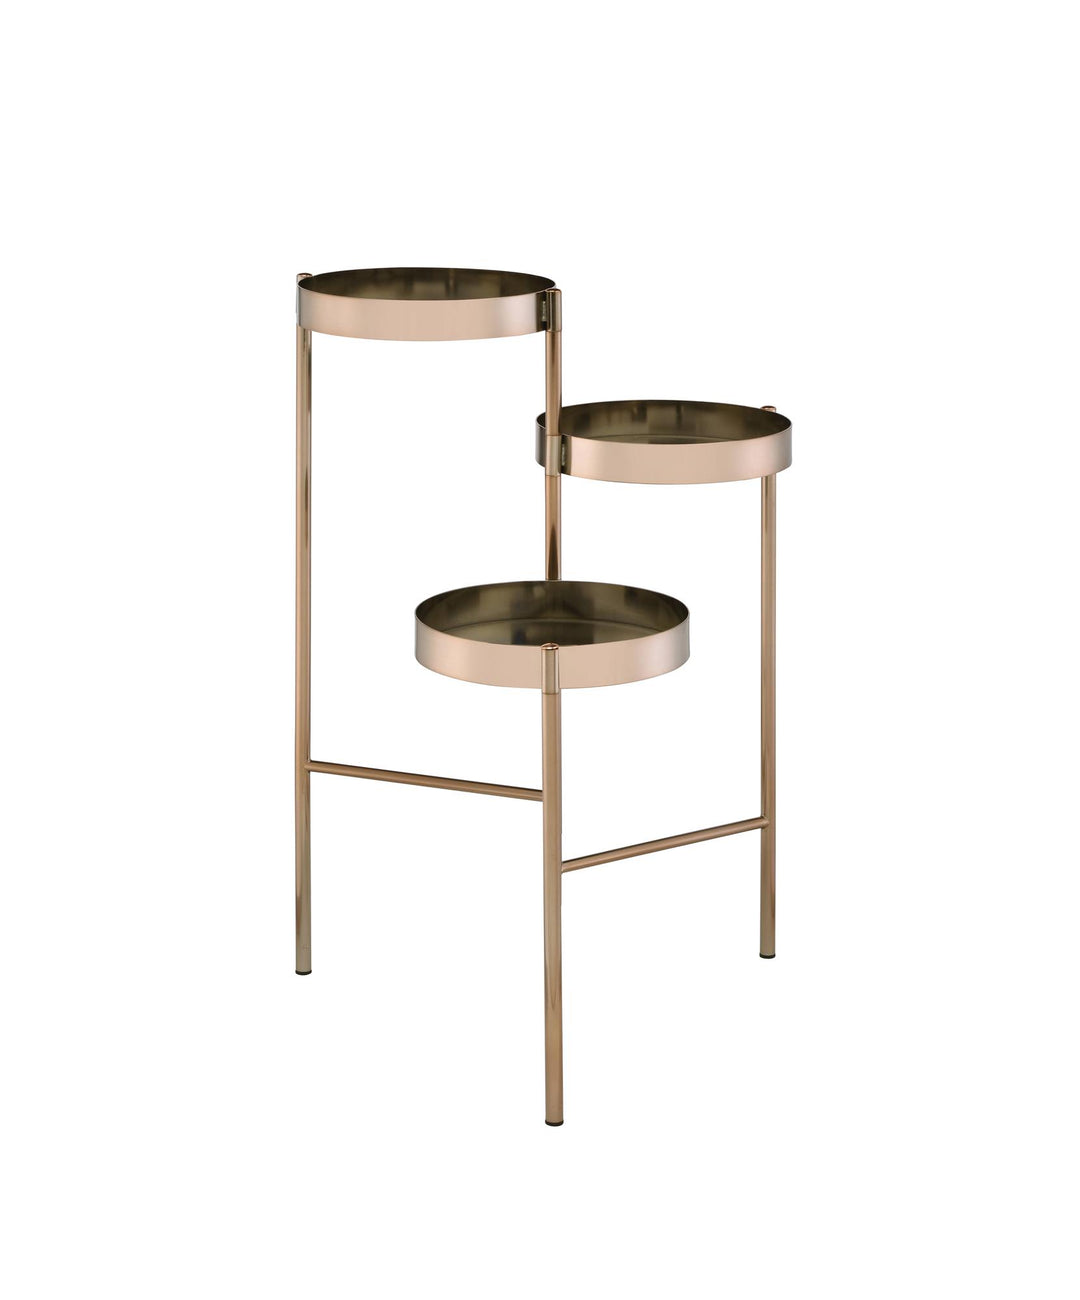 Round plant stand with metal compartments - Gold